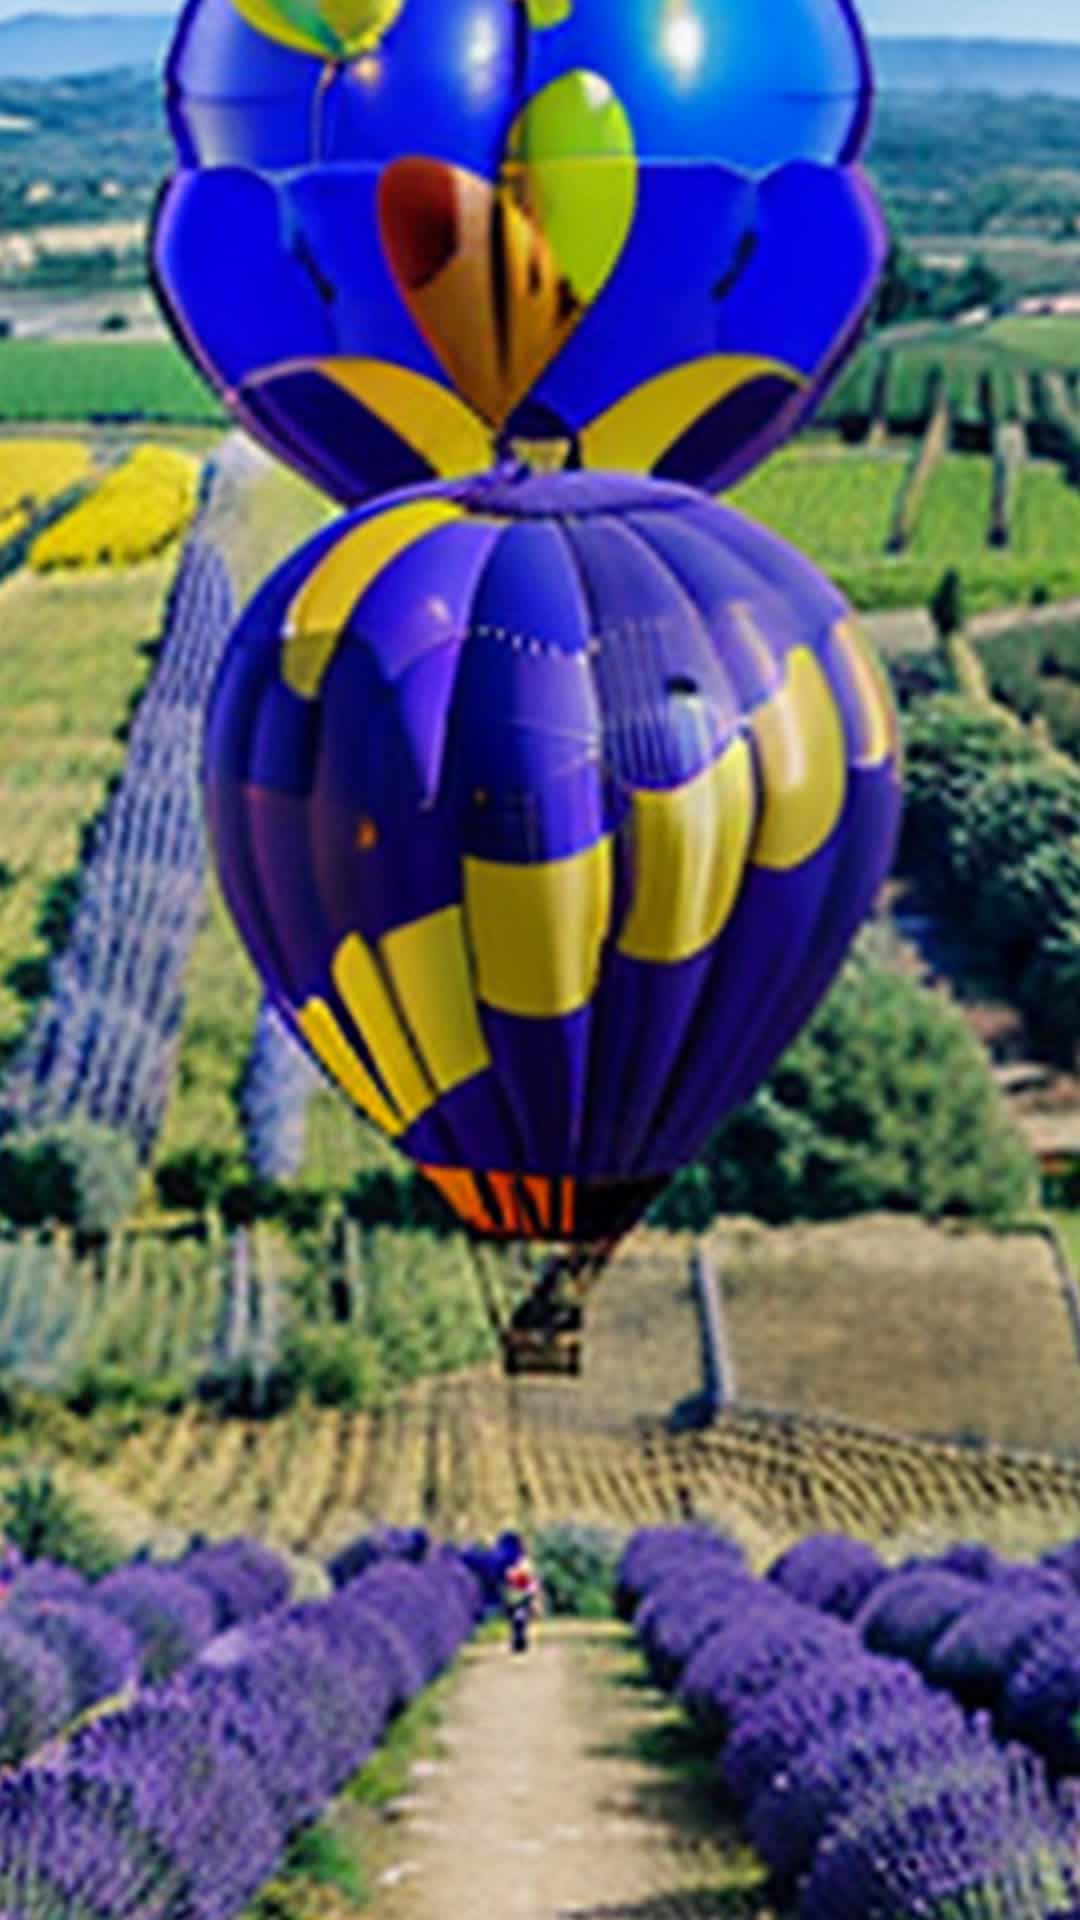 Balloon soaring over lavender fields in Provence, cat's wide eyes gleaming, playful butterflies fluttering around